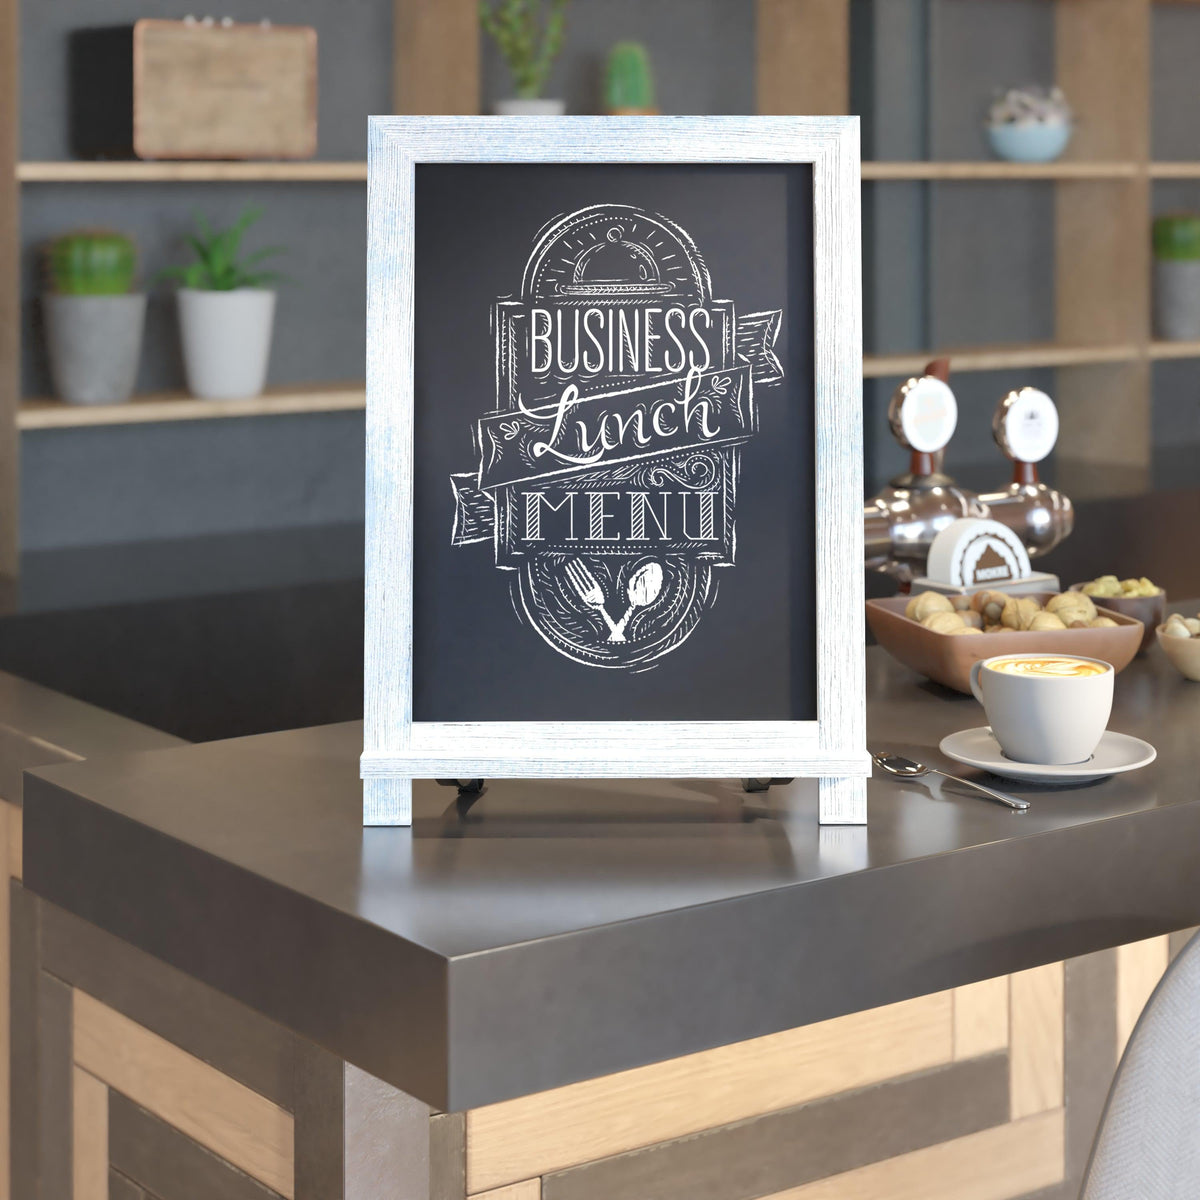 Rustic Blue,12inchW x 1.88inchD x 17inchH |#| 10 Pack 12inch x 17inch Tabletop or Wall Mount Magnetic Chalkboards - Rustic Blue